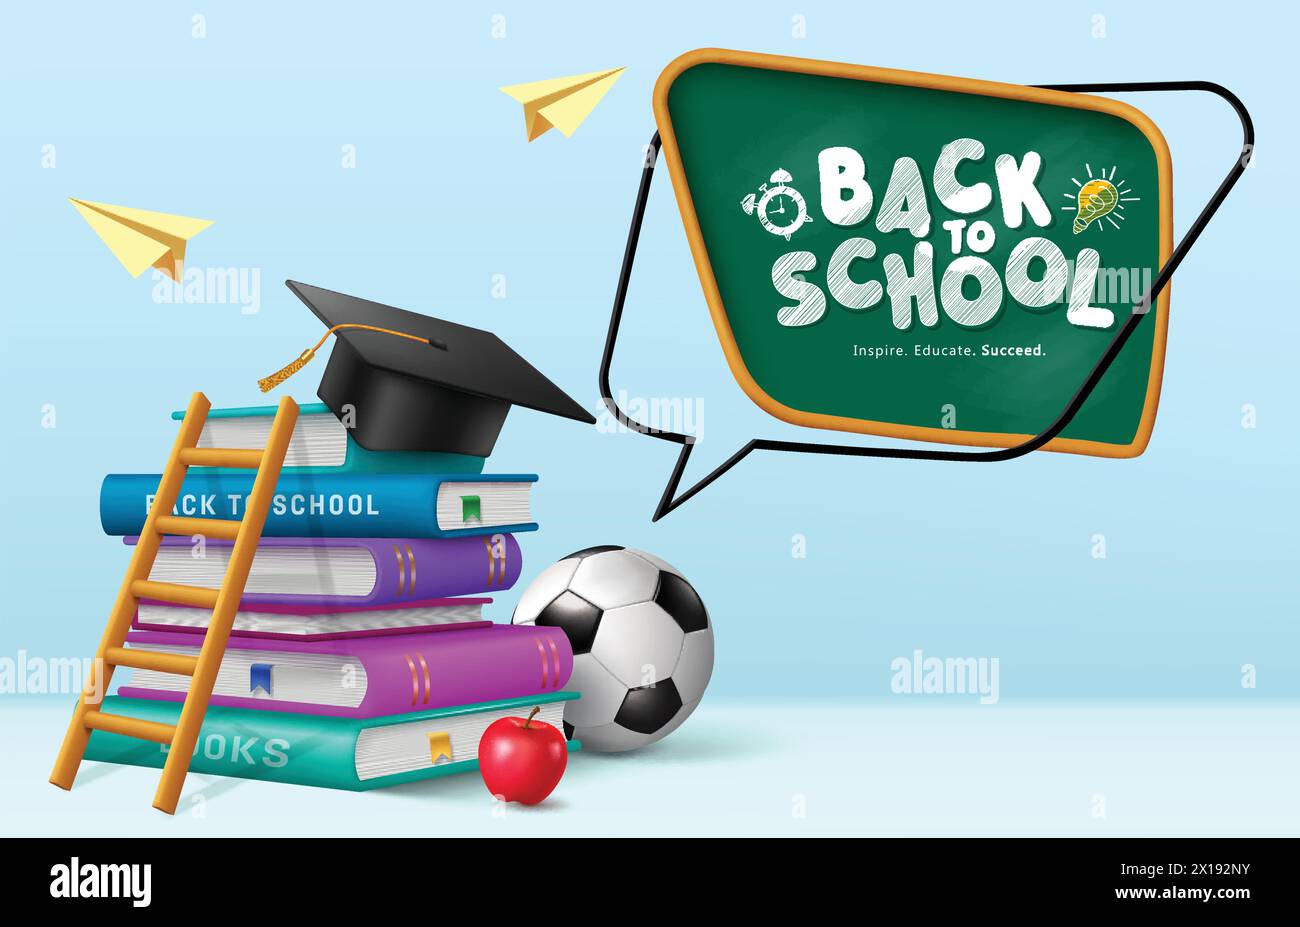 Back to school books vector design. Back to school greeting text in chalk board with learning books, ladder, graduation cap elements for educational Stock Vector